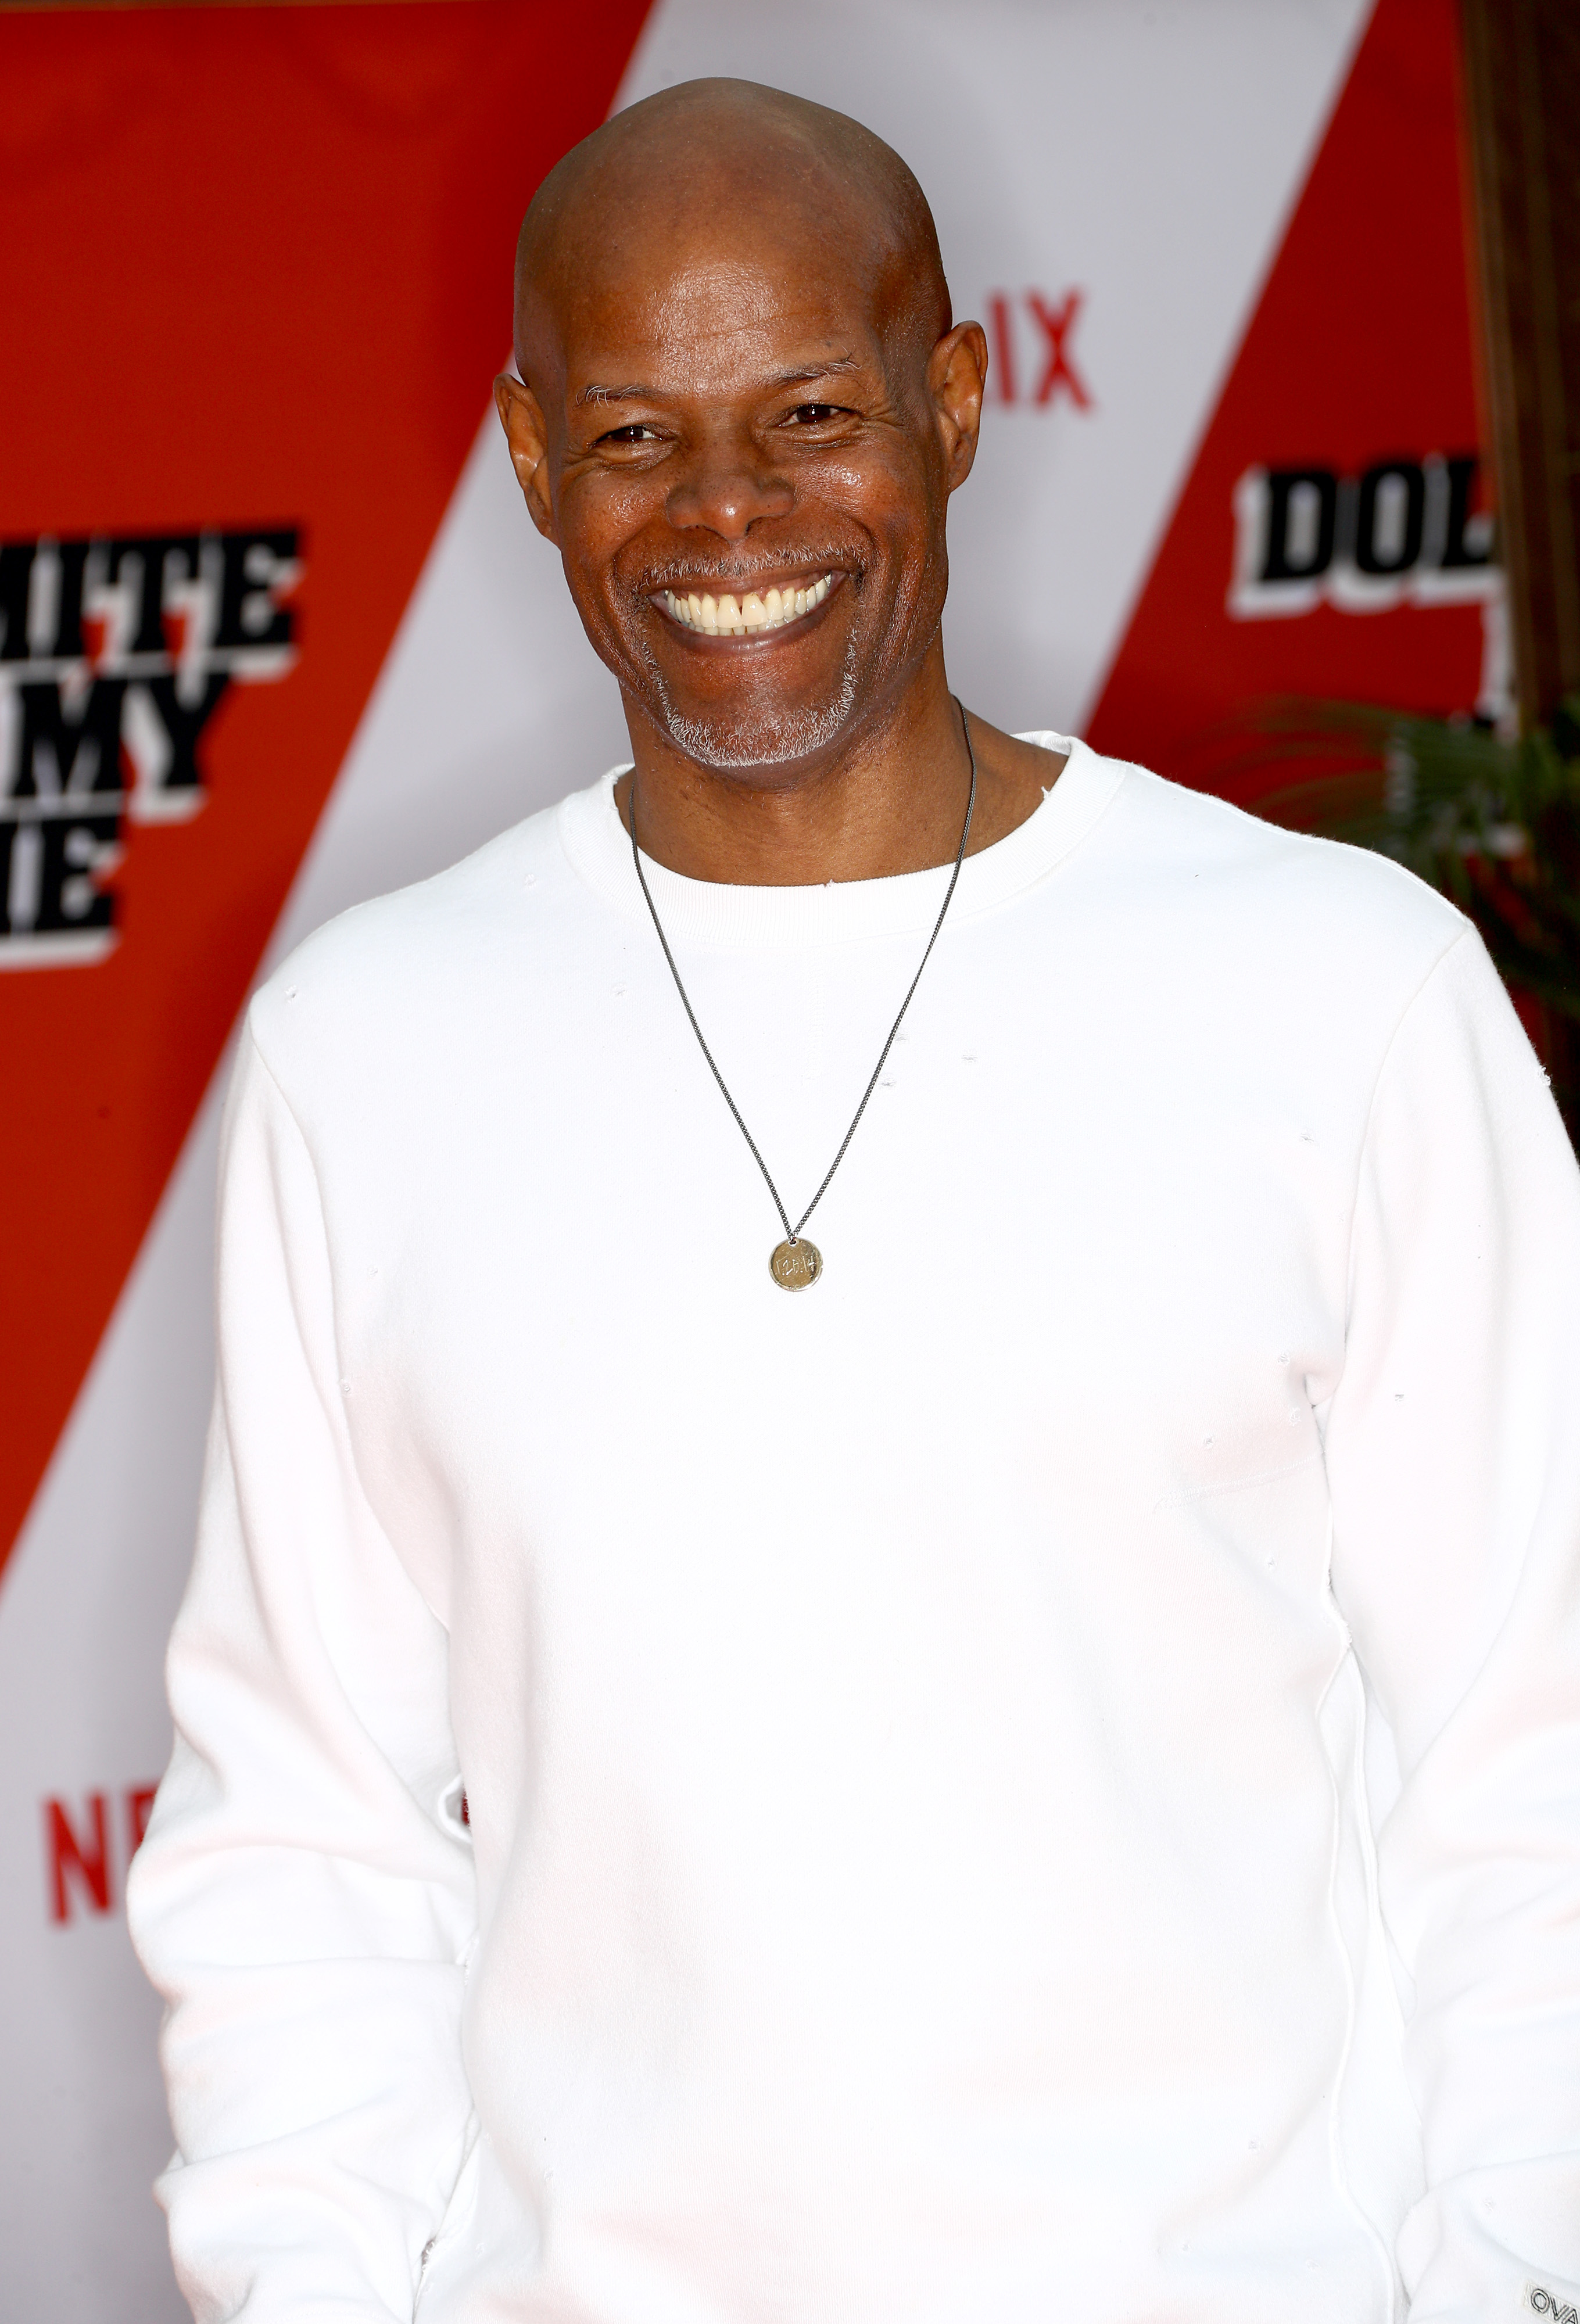 Keenen Ivory Wayans at the LA premiere of Netflix's "Dolemite Is My Name" on September 28, 2019, in Westwood, California. | Source: Getty Images